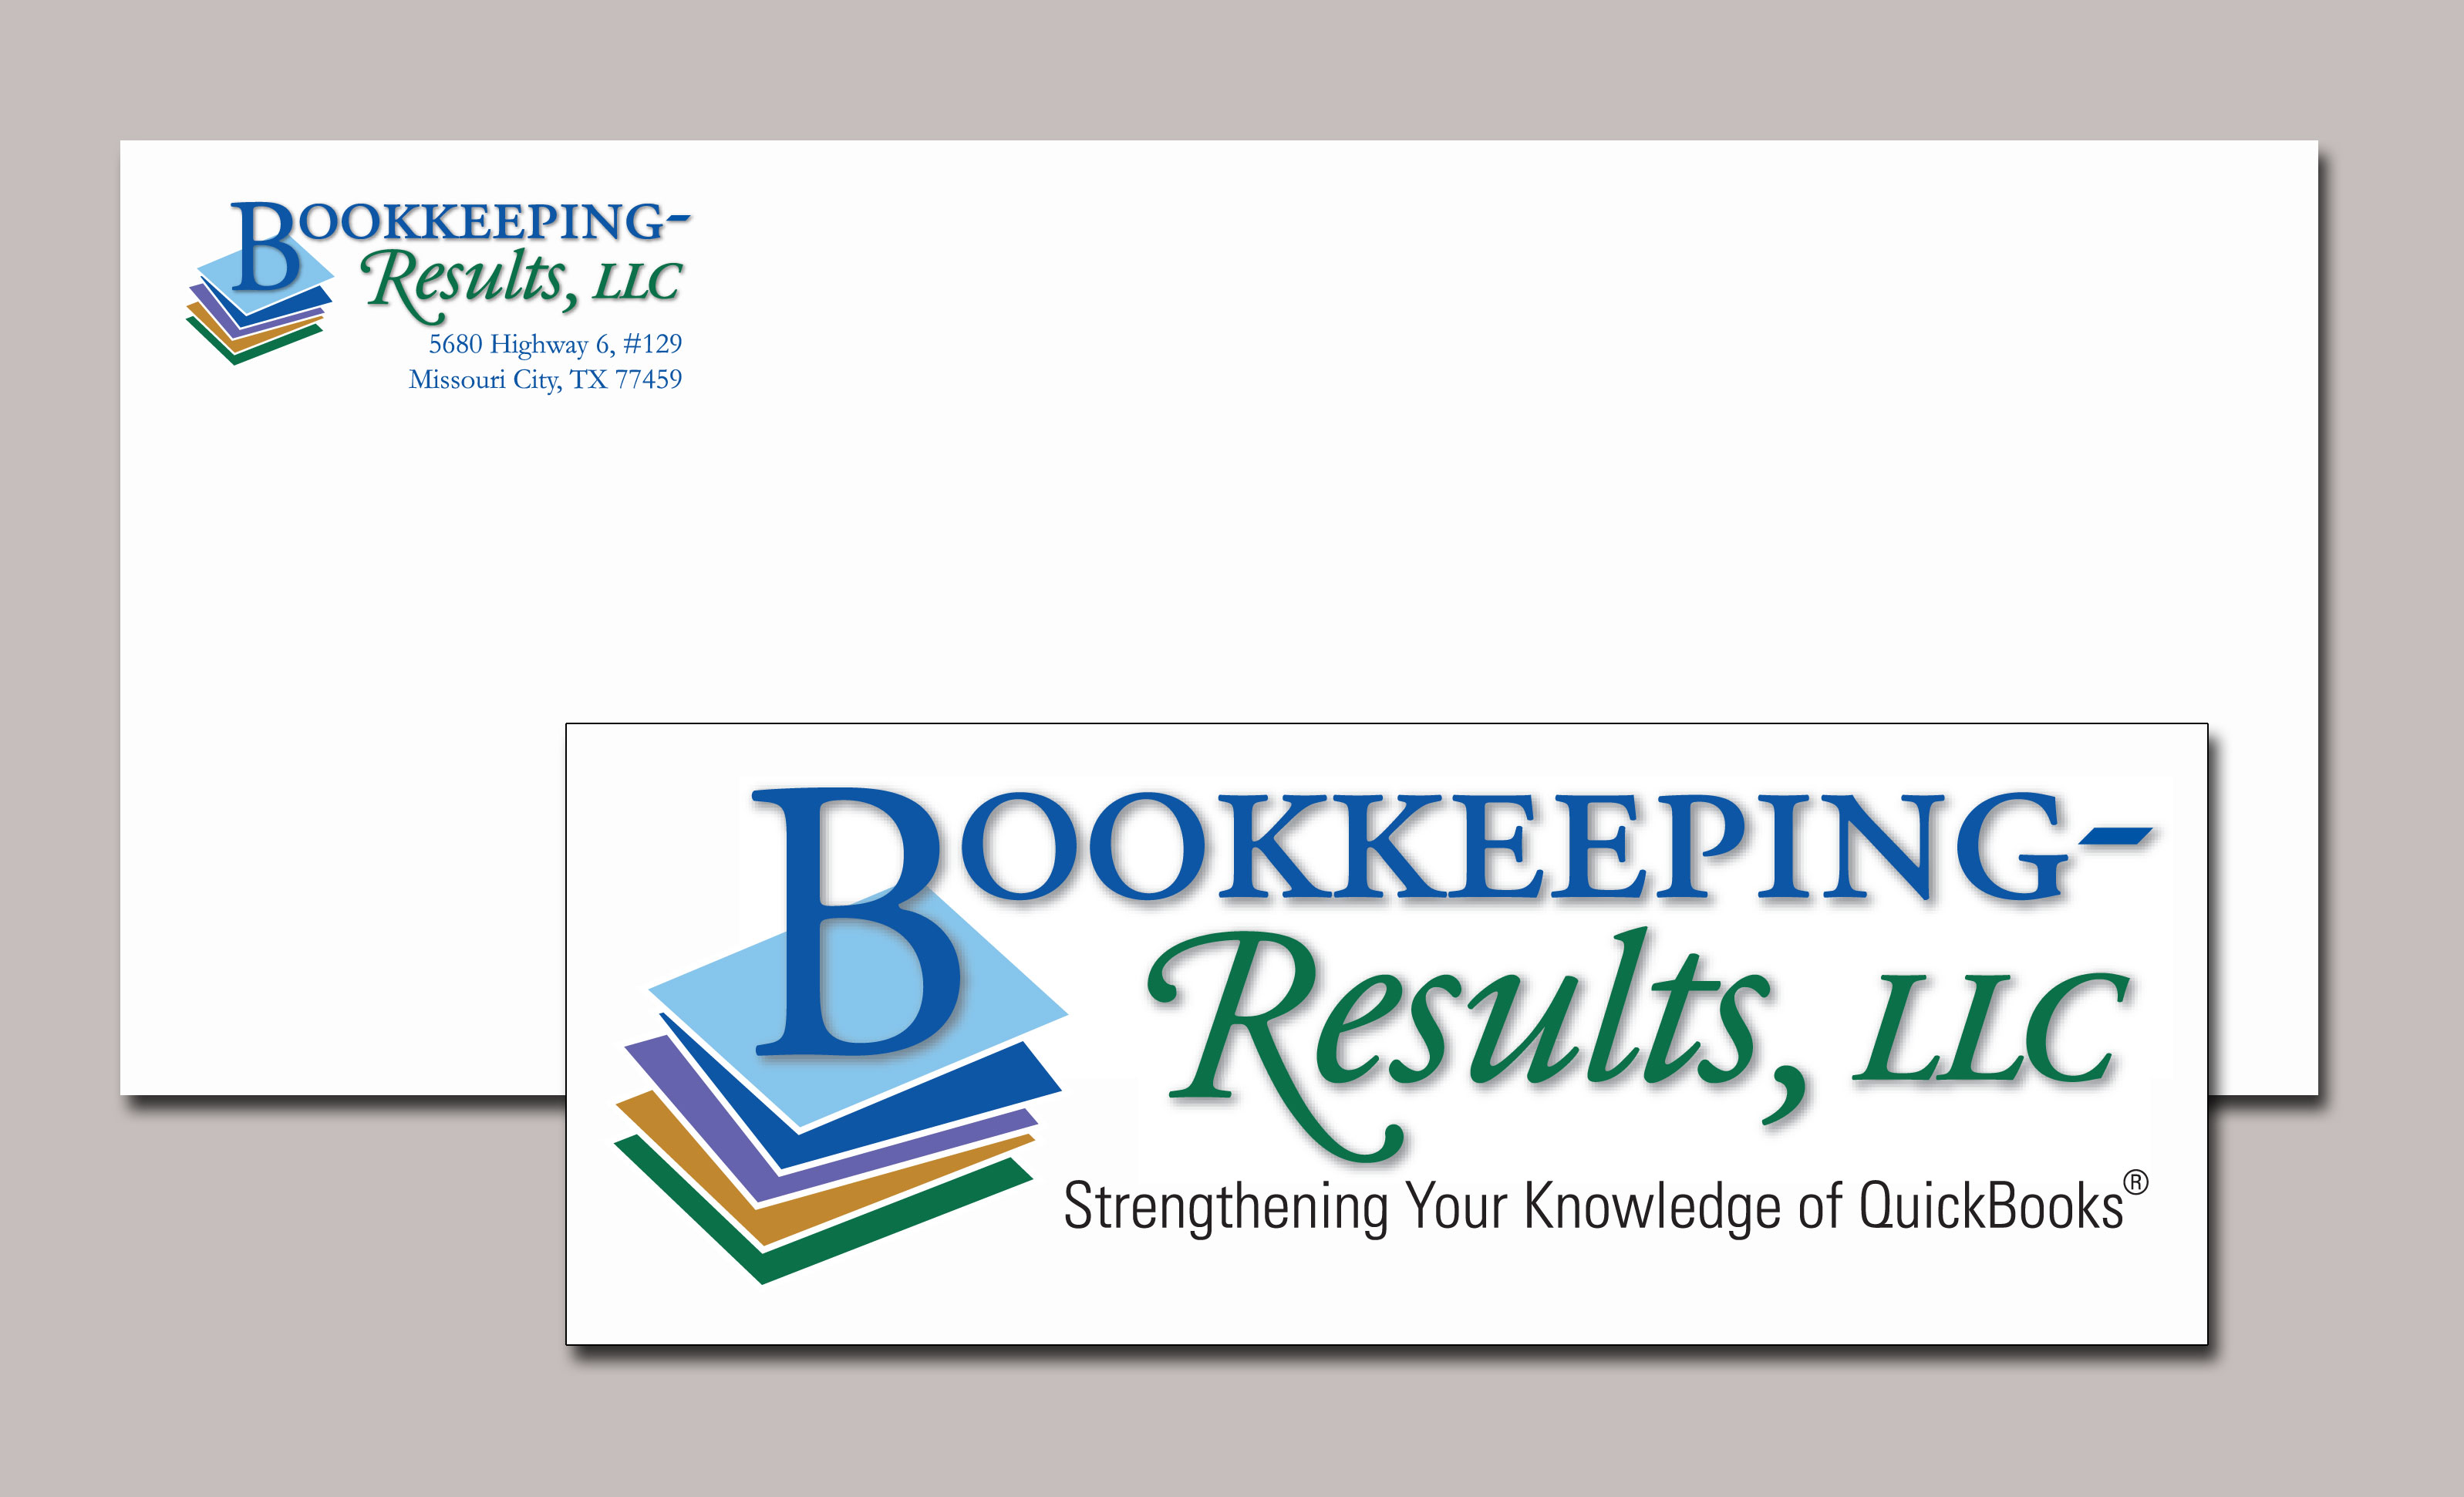 Bookkeeping-Results Logo and Envelope